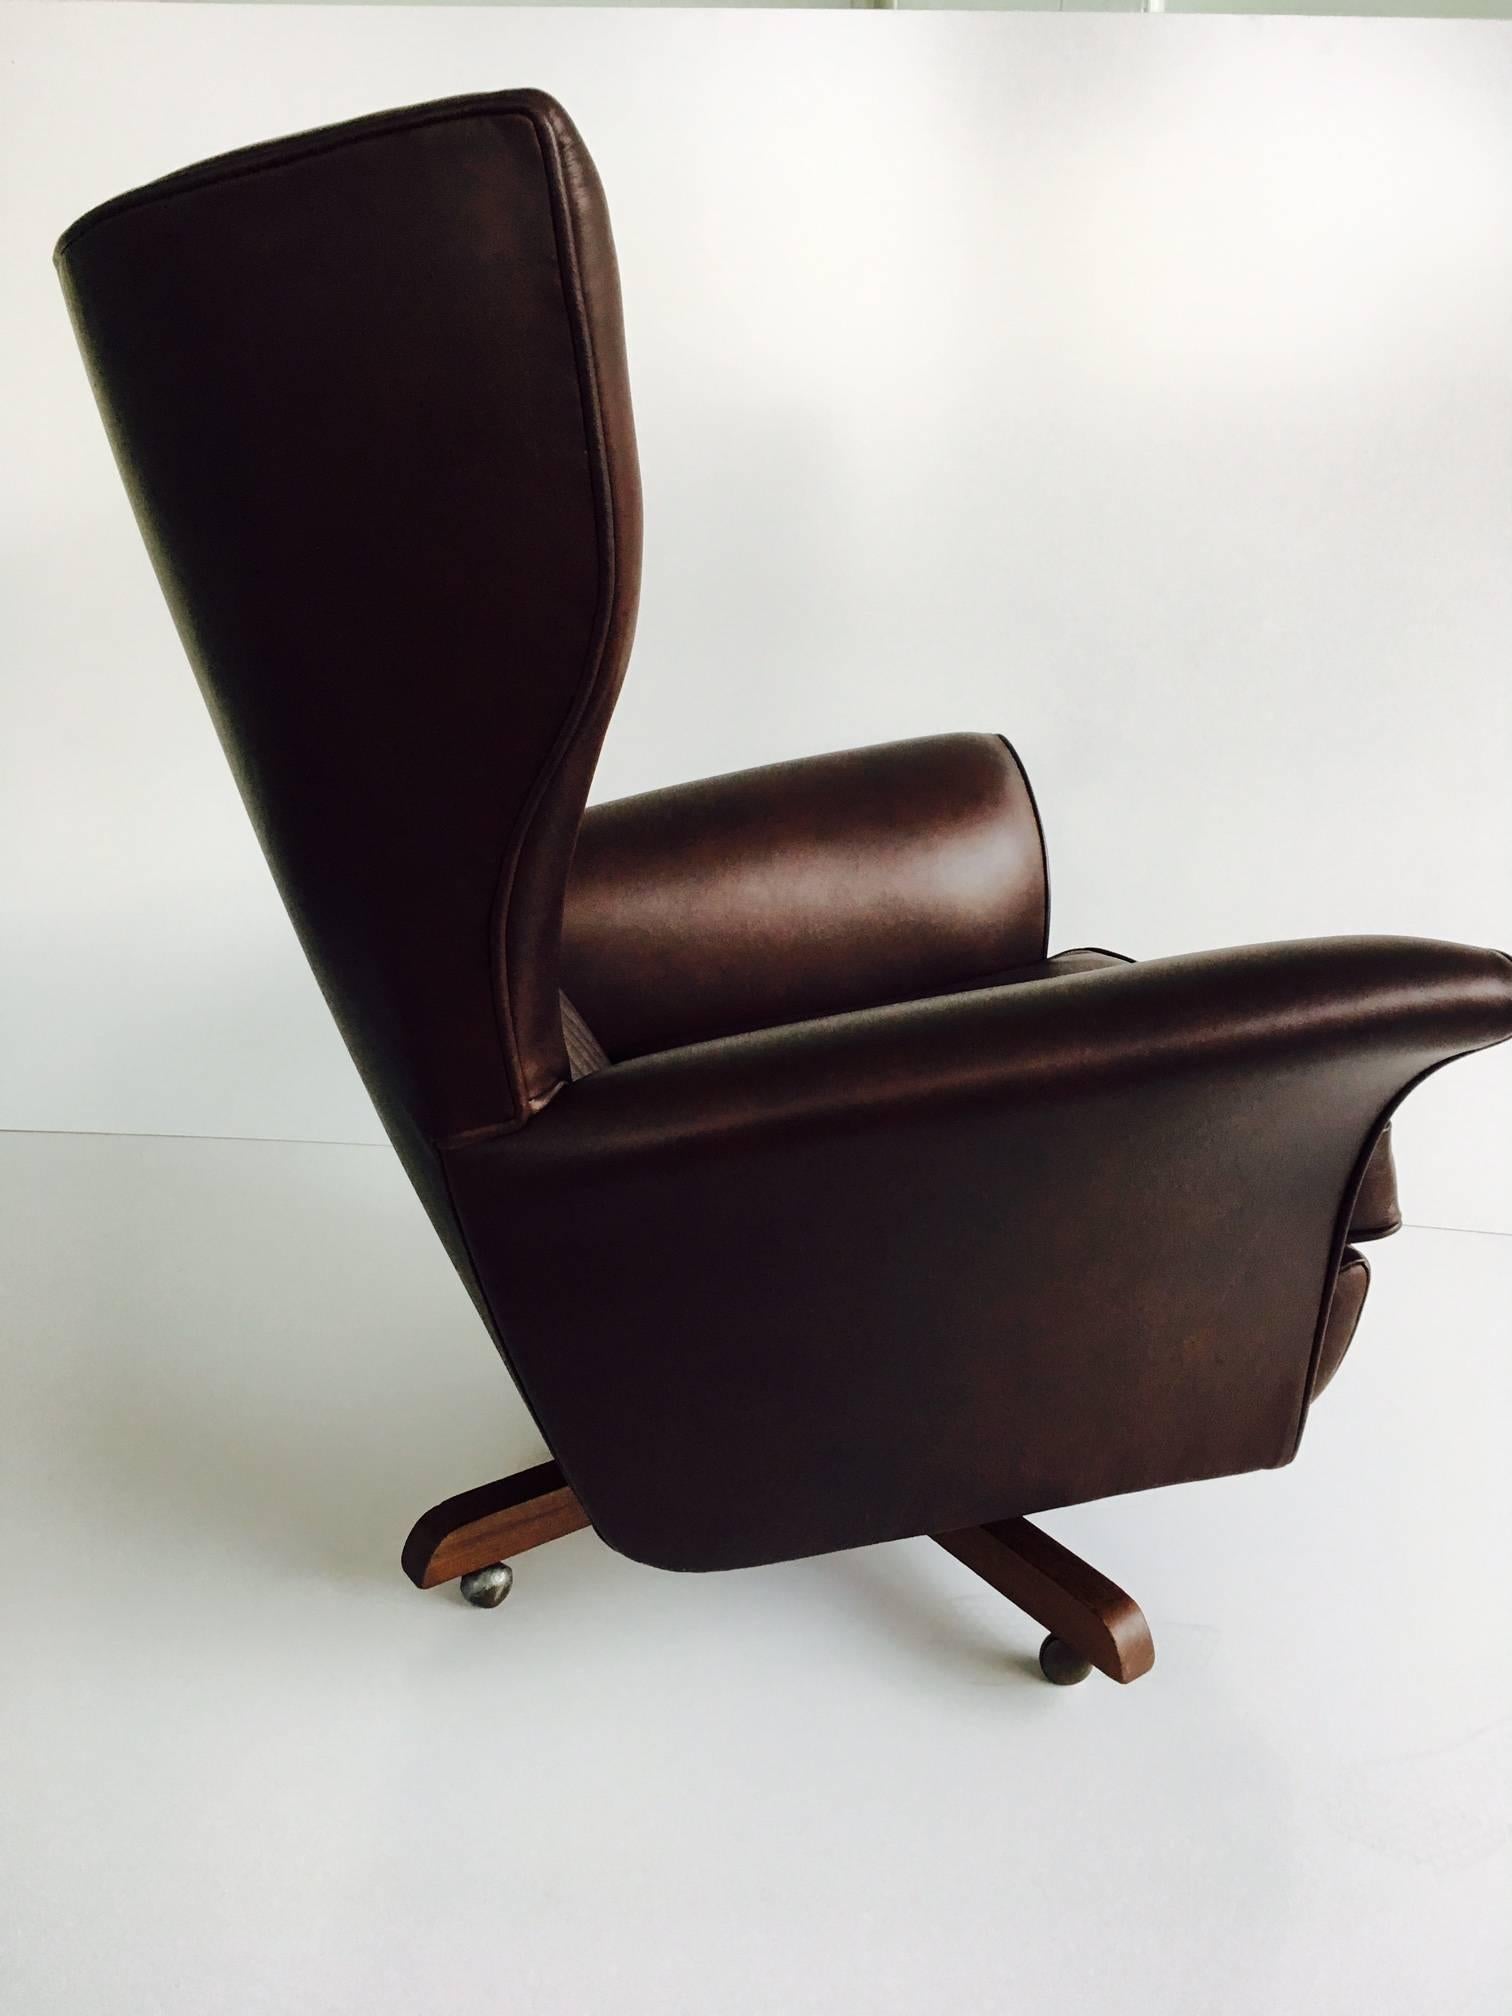 Original 1962 leather 6250 swivel wing chair by G Plan Furniture.

Aptly known as ‘The World’s Most Comfortable Chair’ it has a distinctive winged design, soft foam cushioning and deeply buttoned back, provide the ultimate in comfort.

Newly